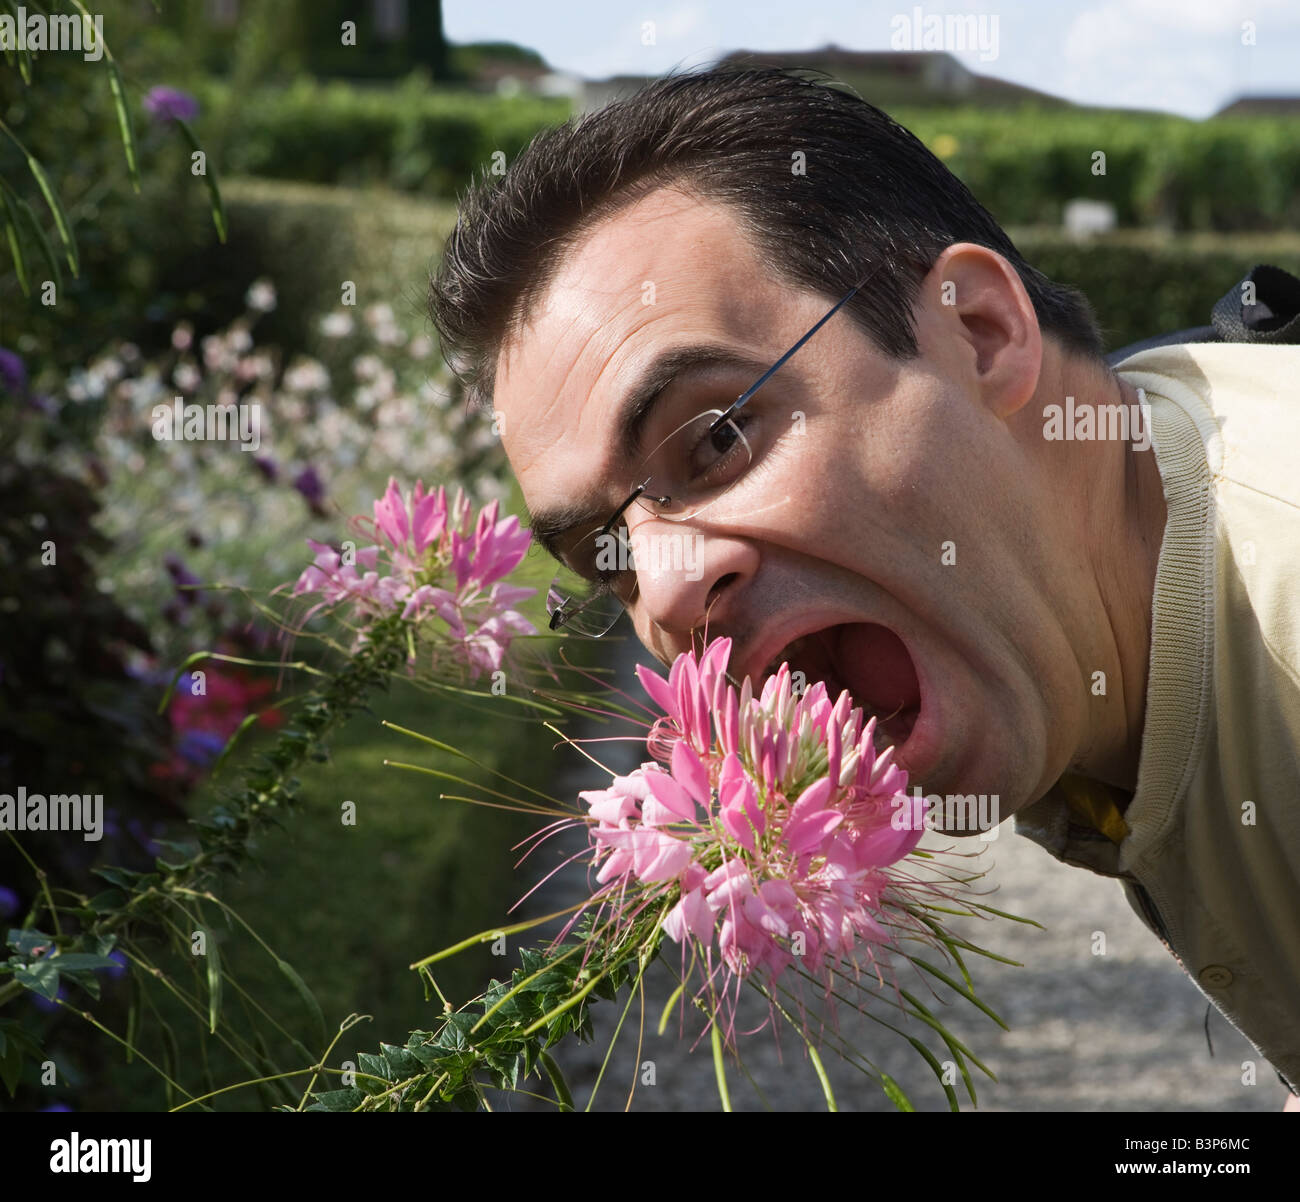 man male eating eat flower crazy craziness funny Stock Photo - Alamy